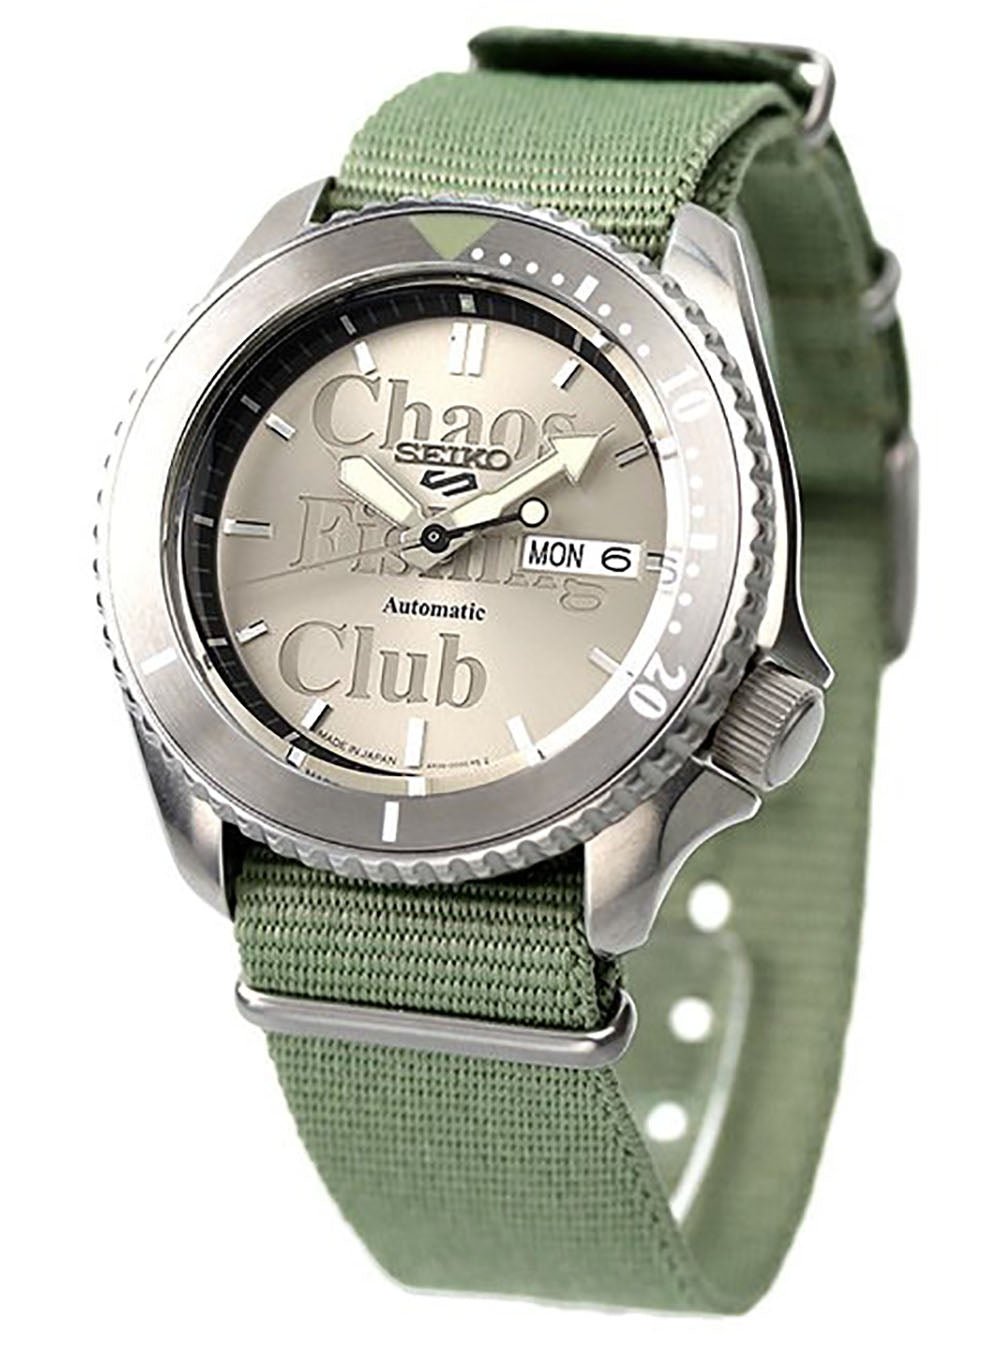 SEIKO 5 SPORTS × CHAOS FISHING CLUB LIMITED EDITION SBSA169 MADE IN JAPAN  JDM